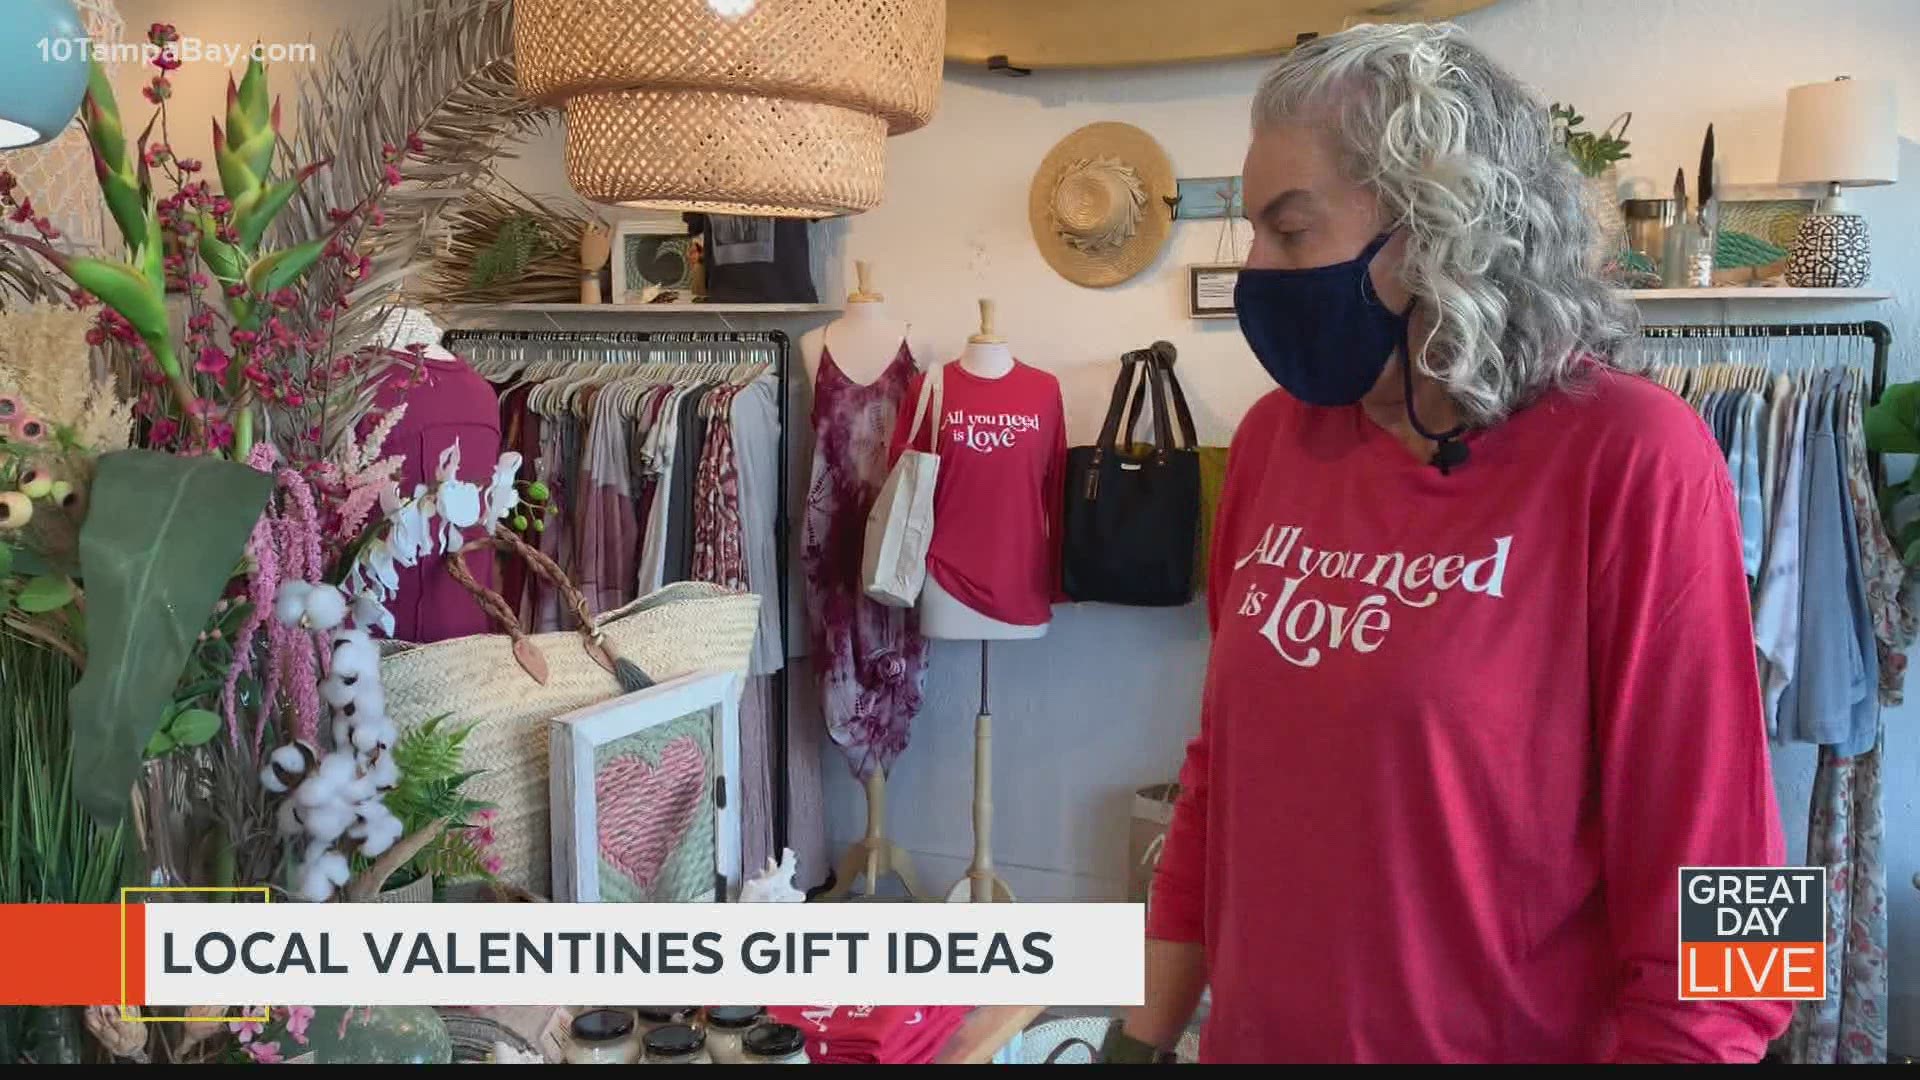 Shop Local: Valentines gifts at The Betty Shop